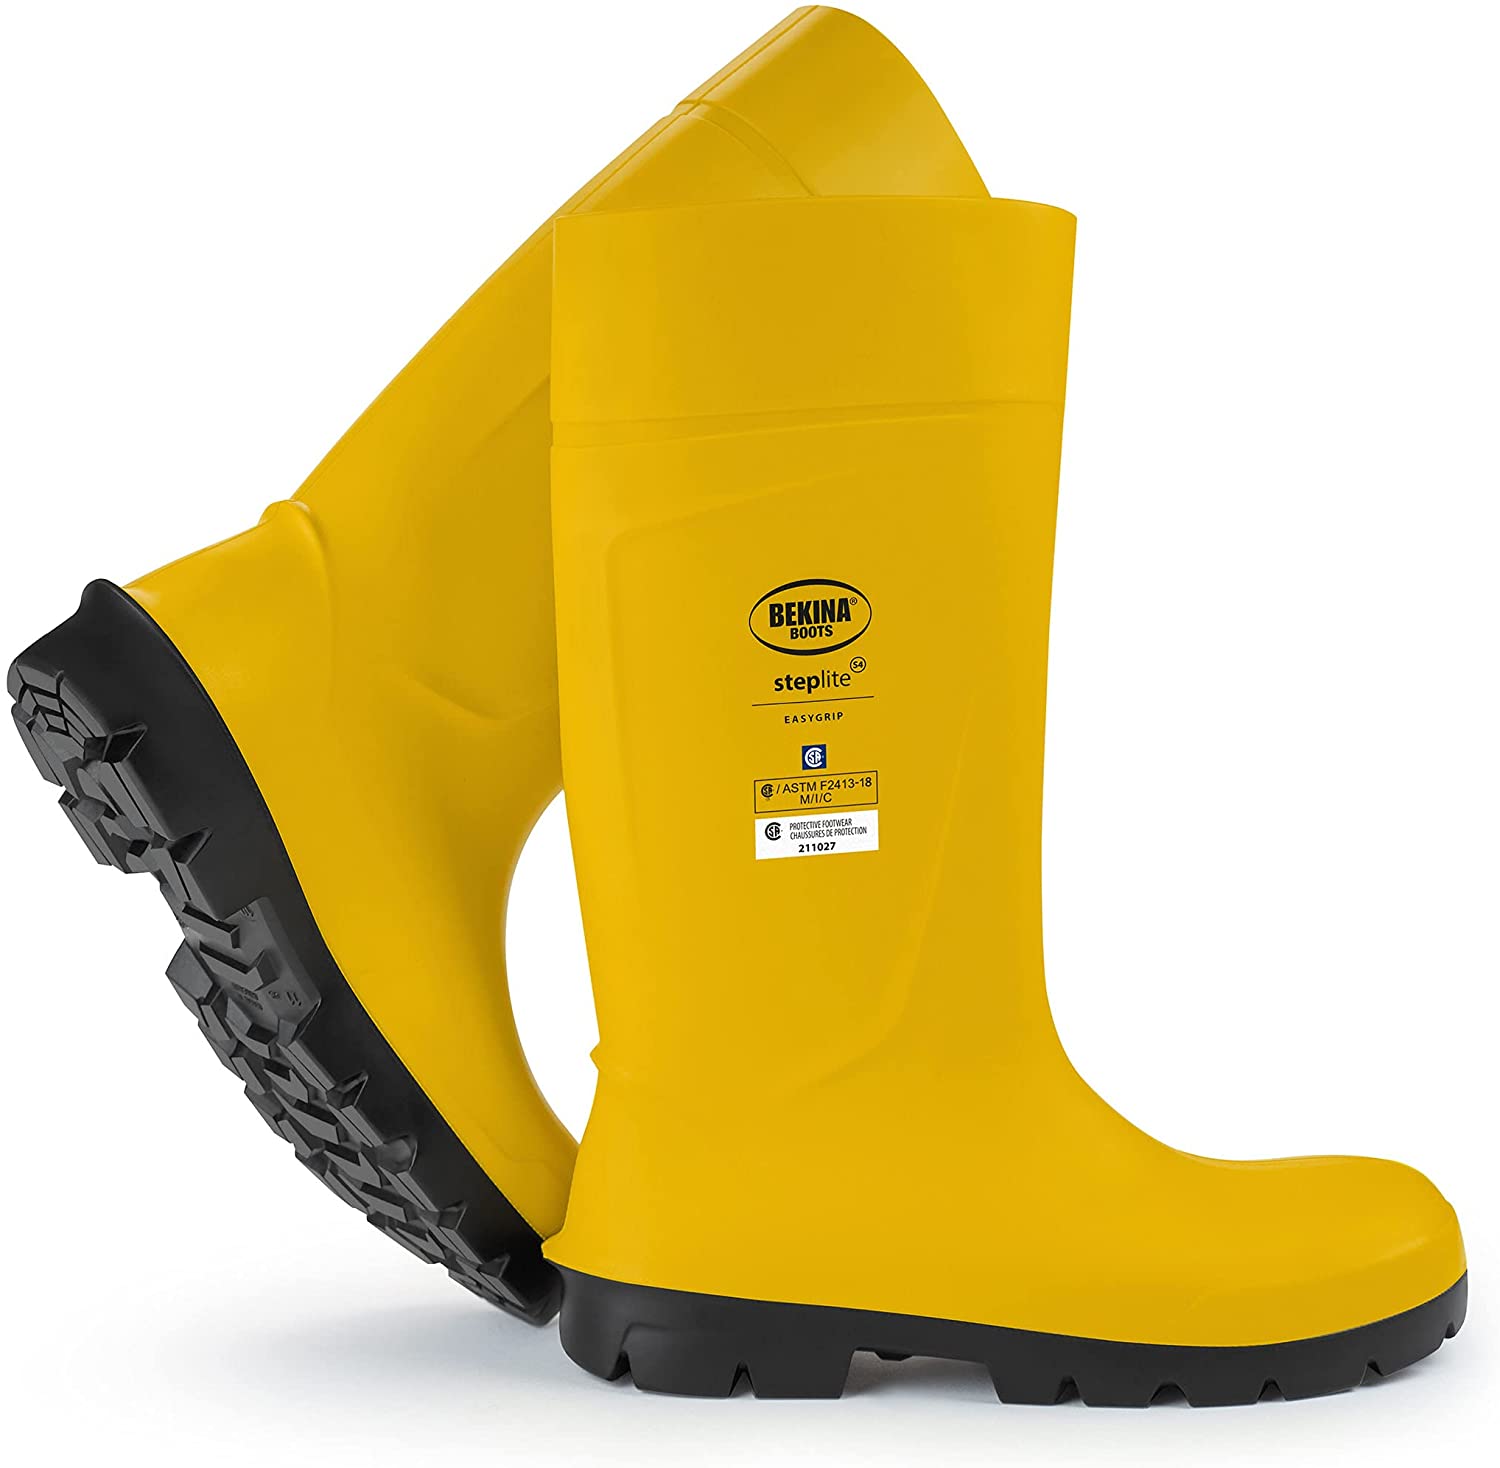 Steplite Easygrip S4 Metal Safety Toe Cap Work Boots in Yellow/Black from the side view